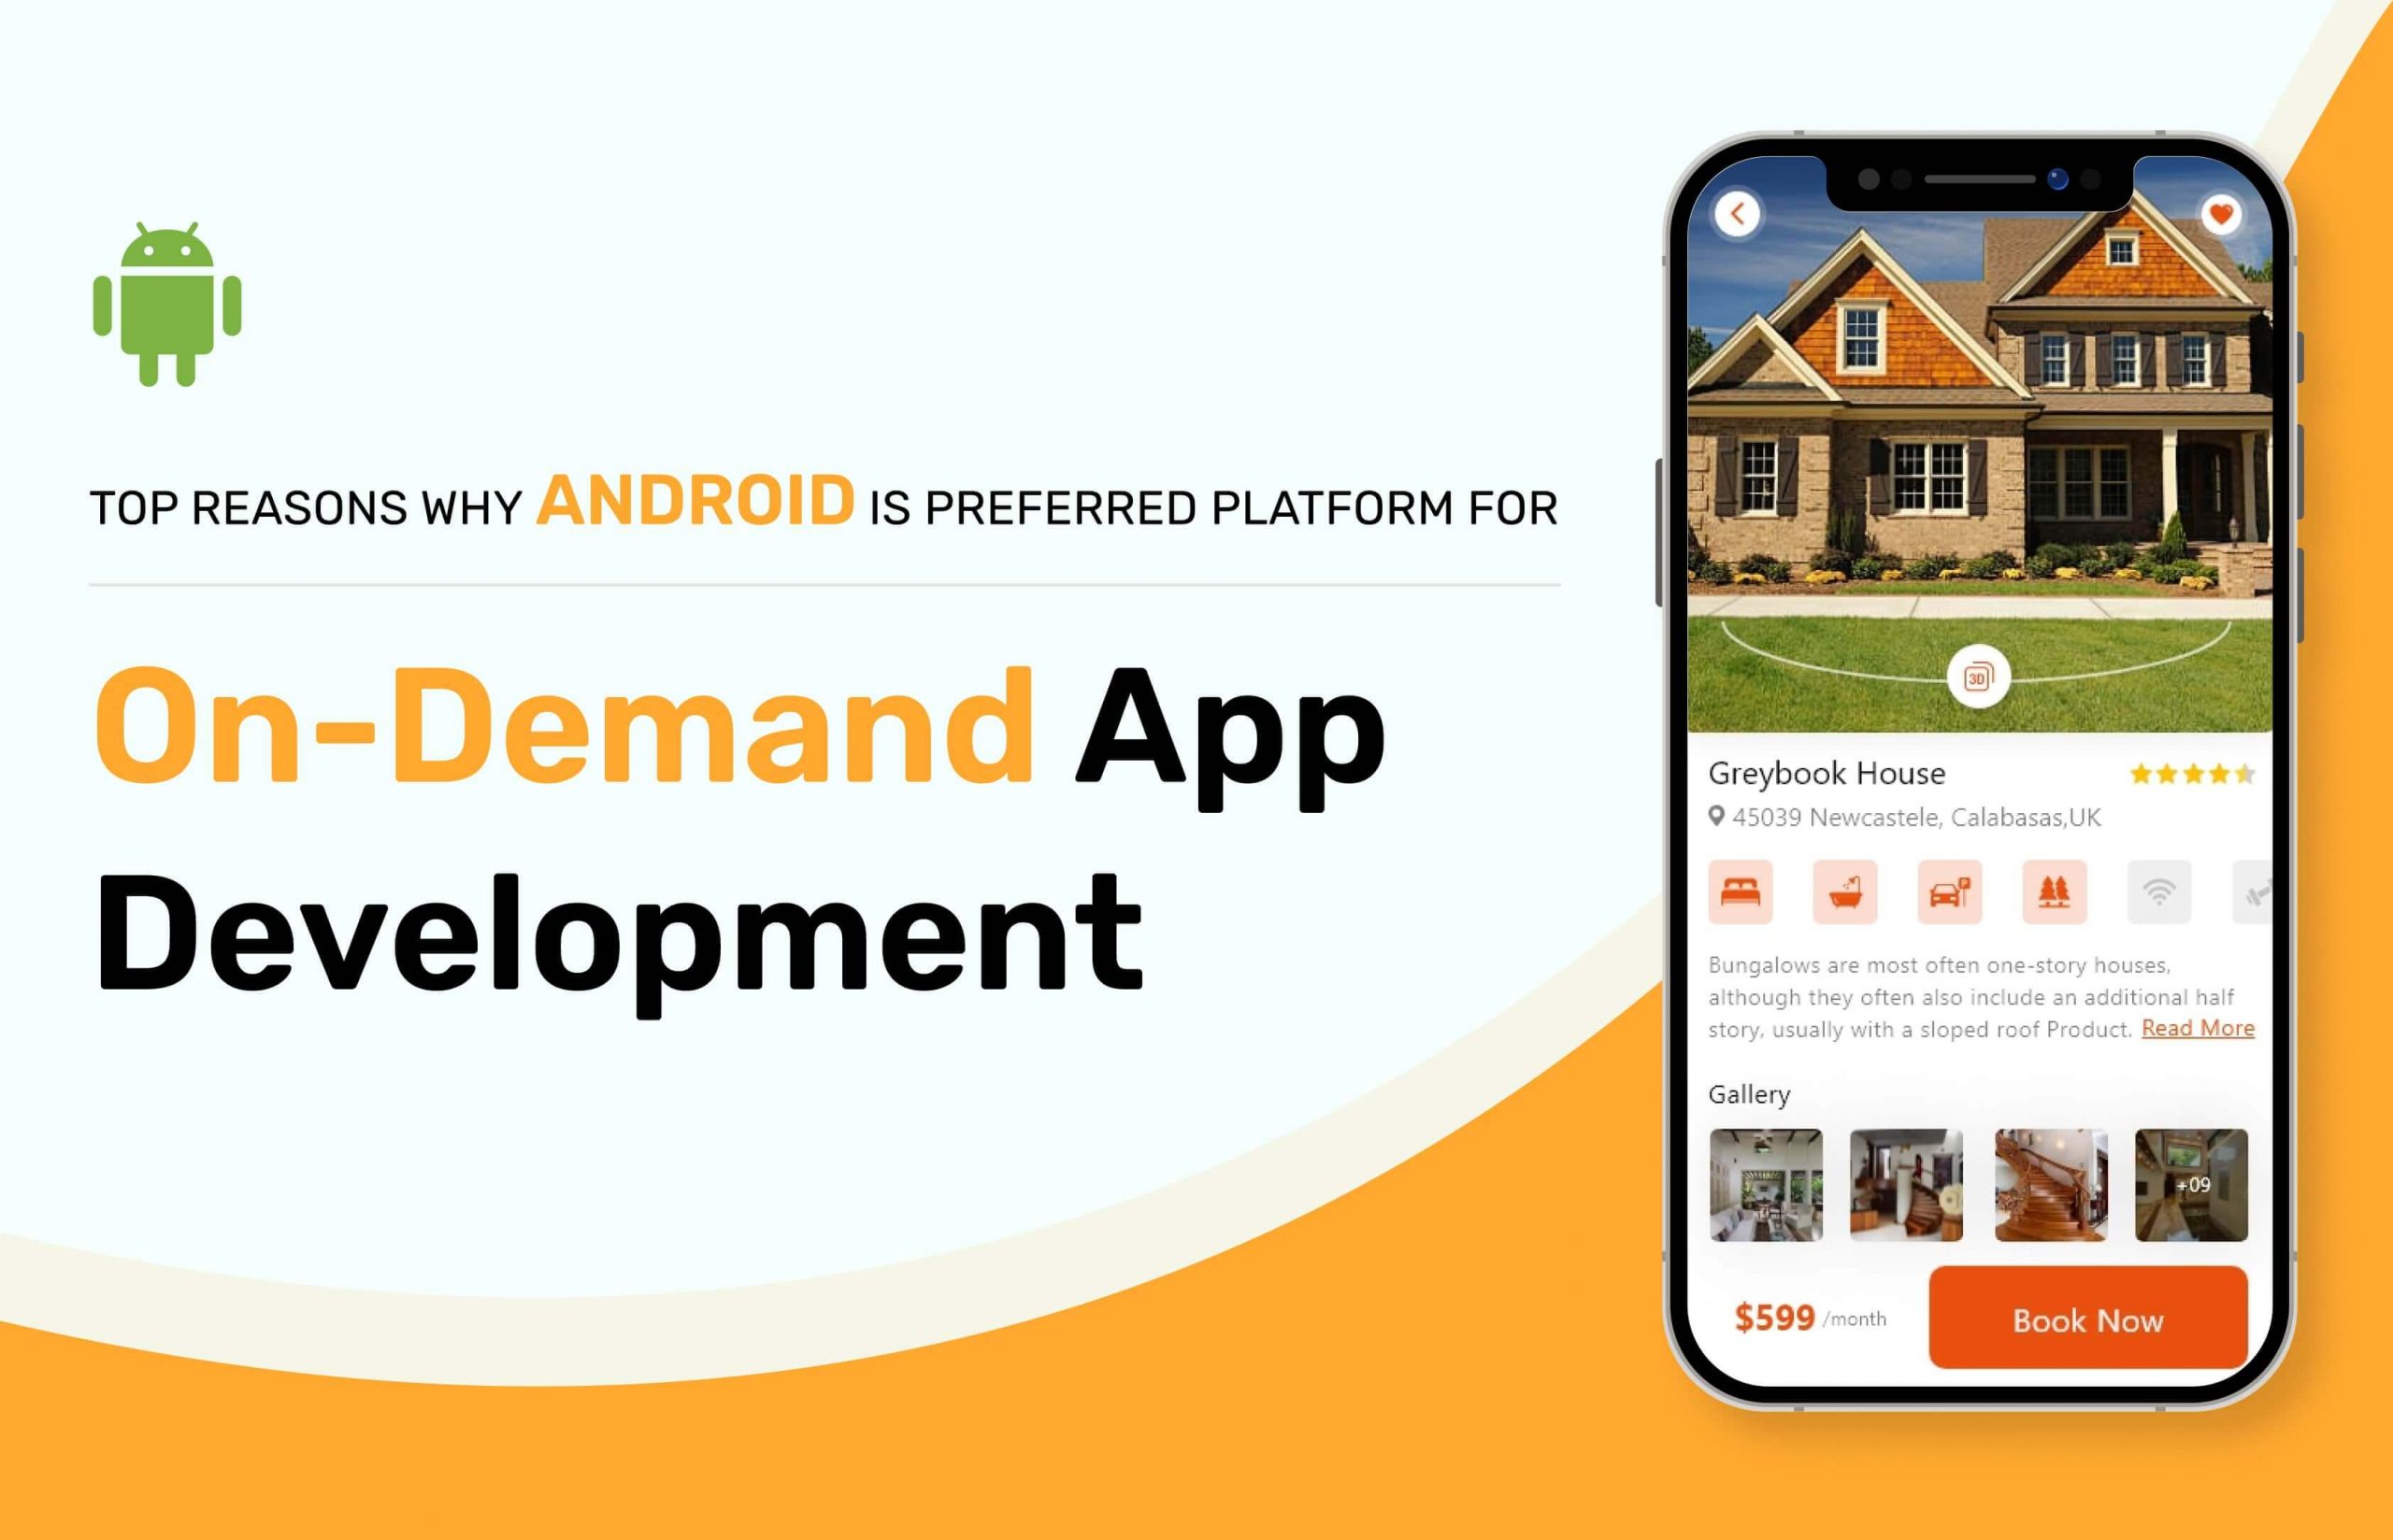 Top Reasons Why Android is Preferred Platform for On-Demand App Development